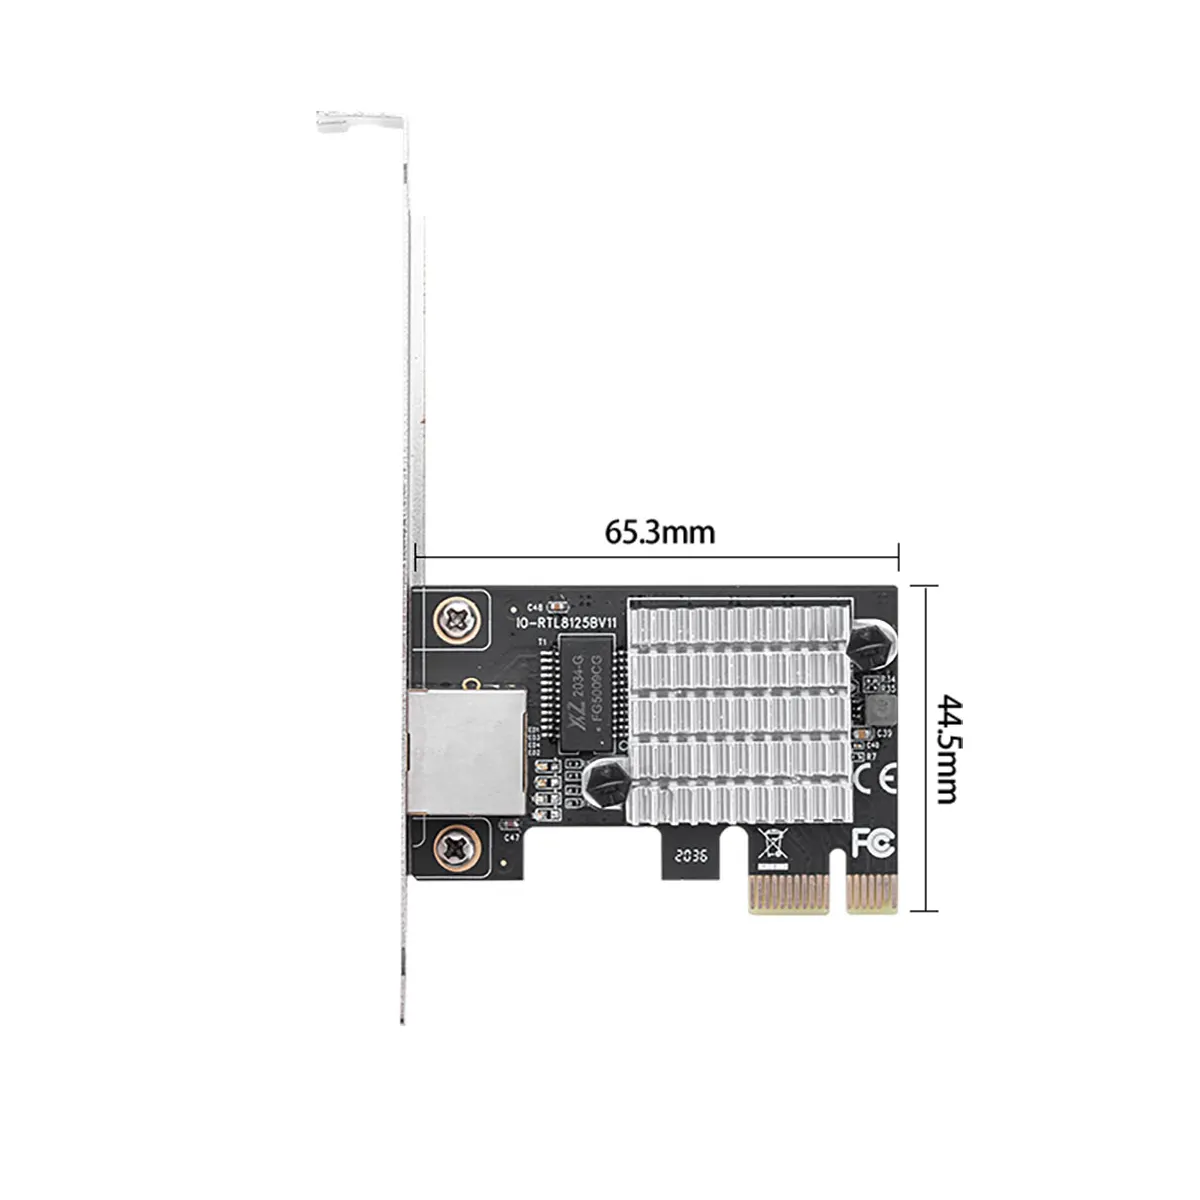 IOCREST 2.5GBase-T PCIe Network Adapter With 1 Port 2500/1000/100Mbps PCI Express Gigabit Ethernet Card